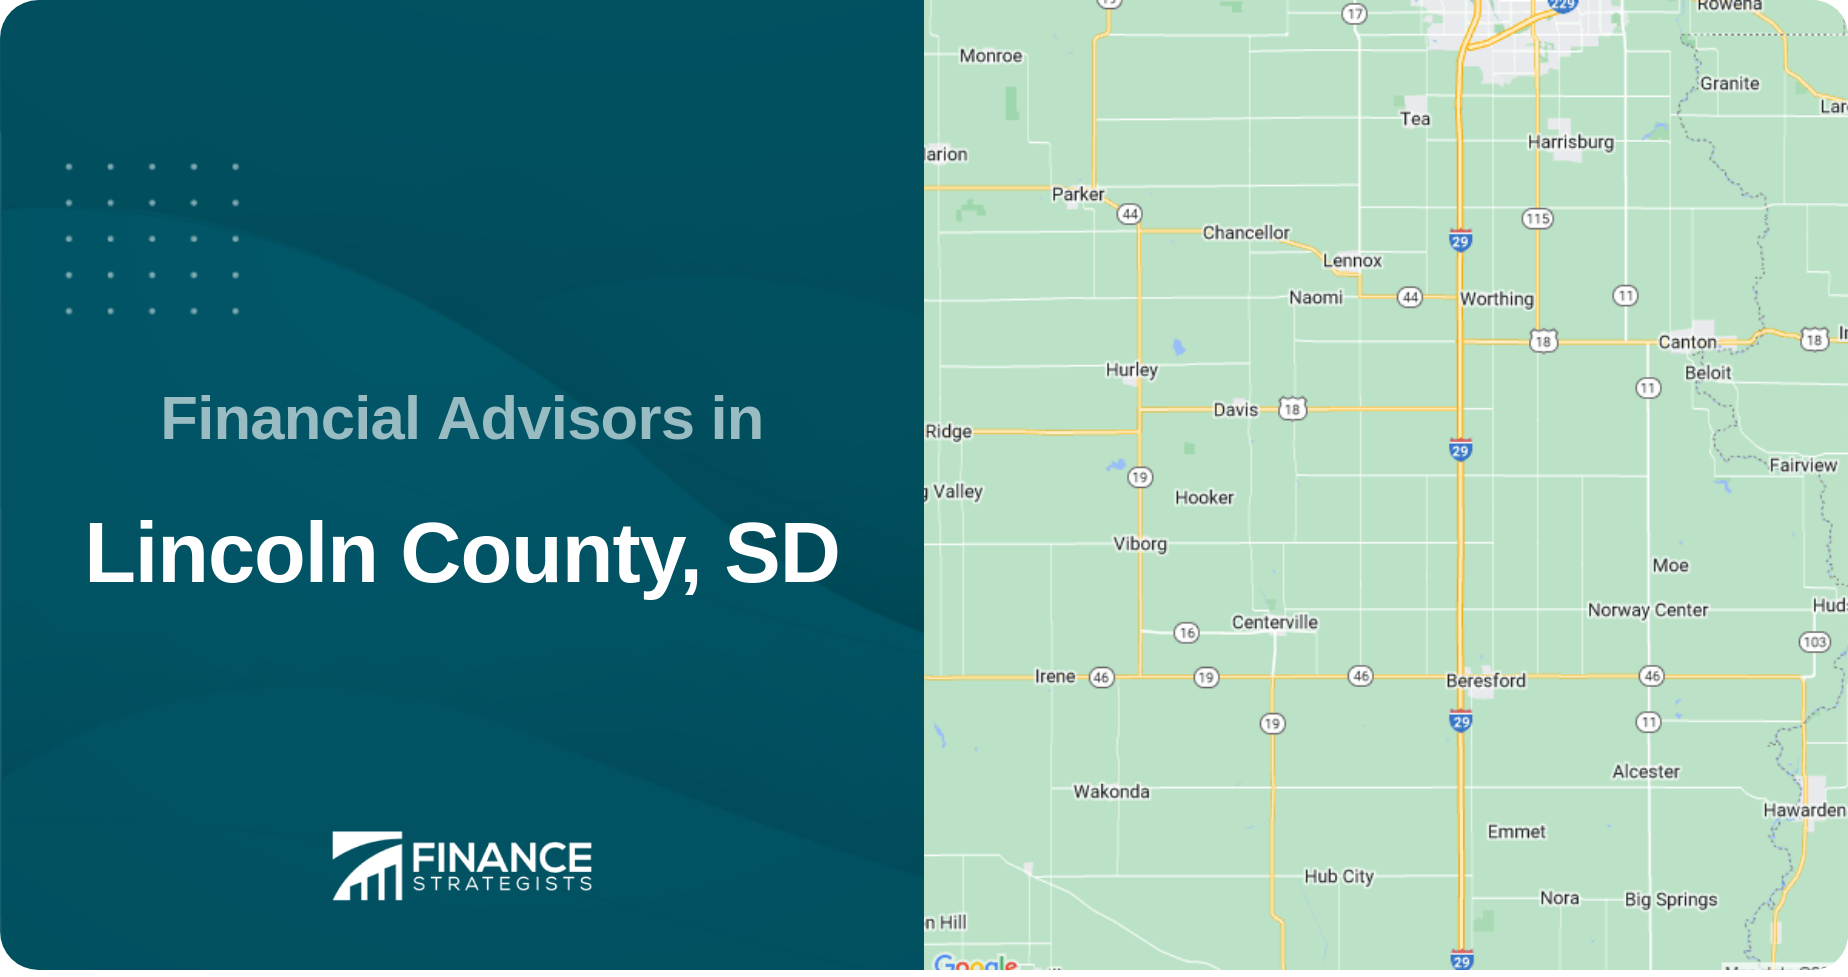 Financial Advisors in Lincoln County, SD